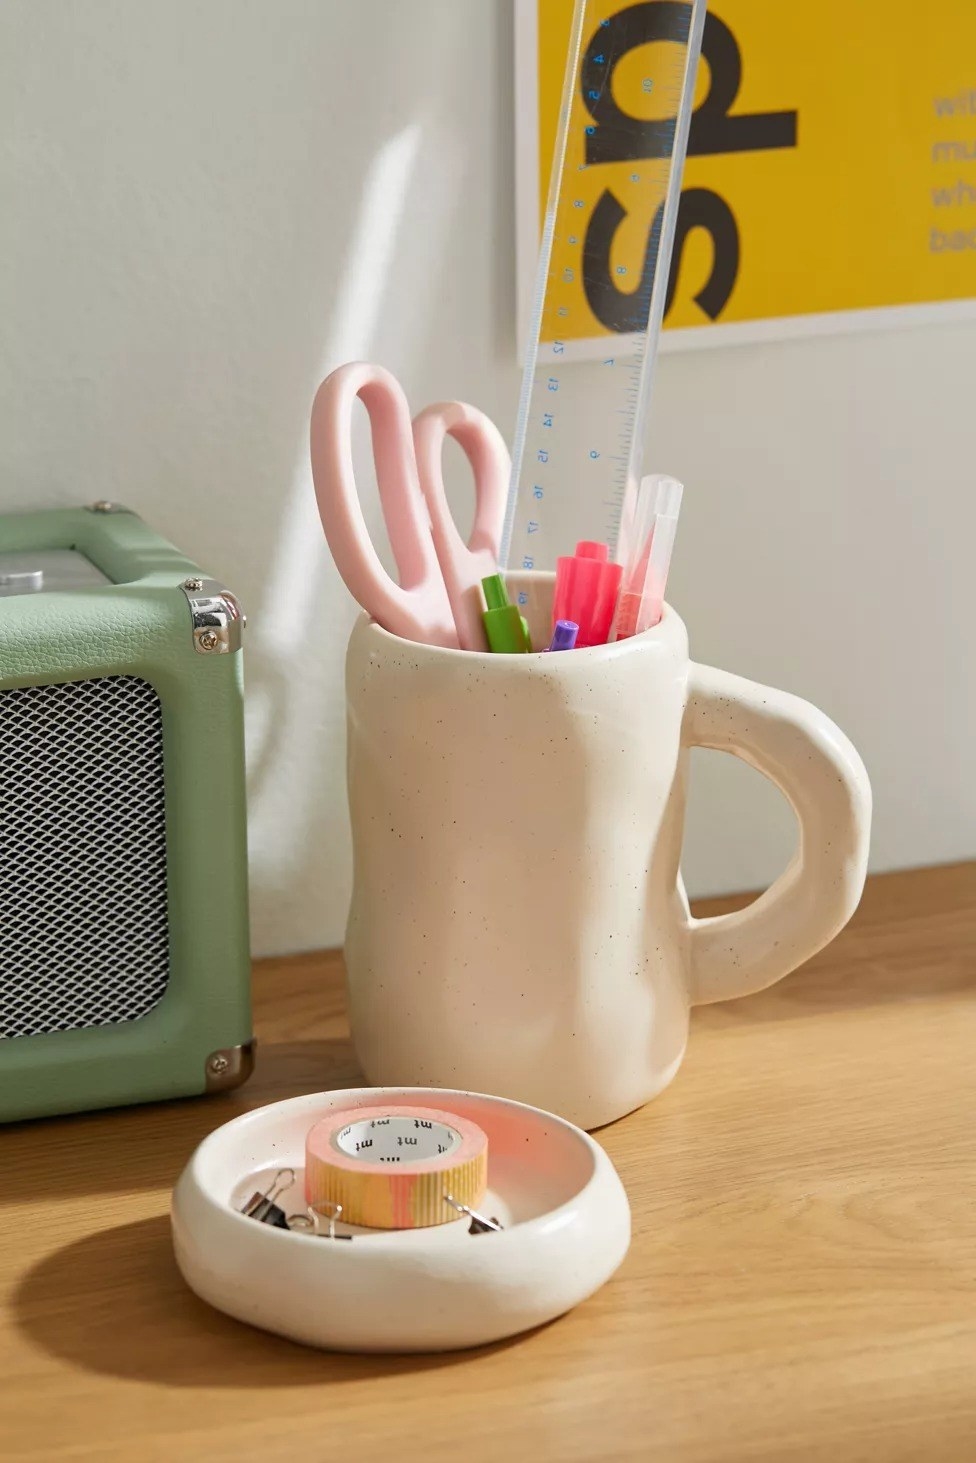 the white mug and coaster set with desk supplies on it